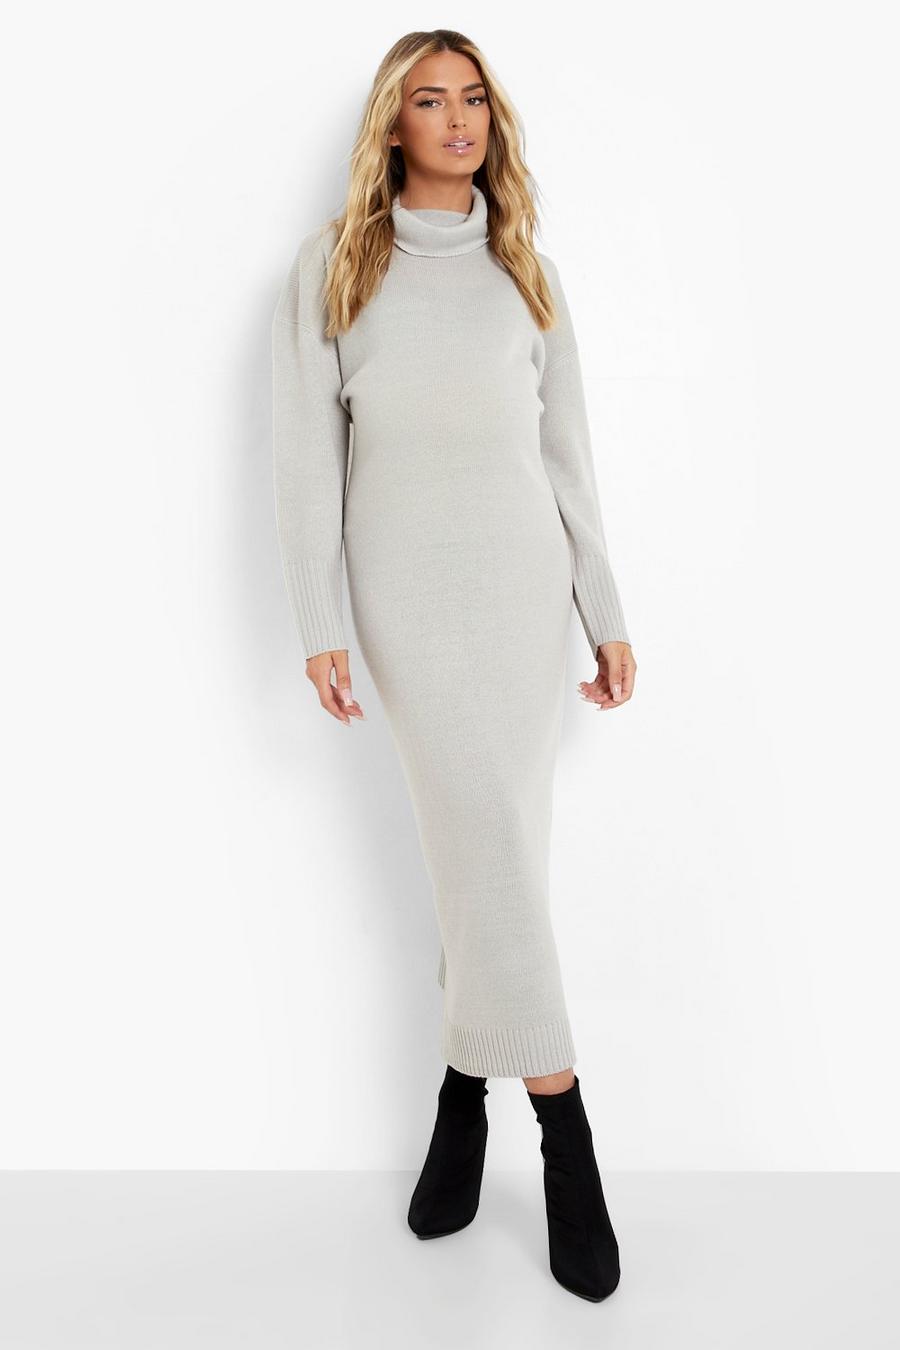 Grey Maternity Cowl Neck Midaxi Knitted Dress